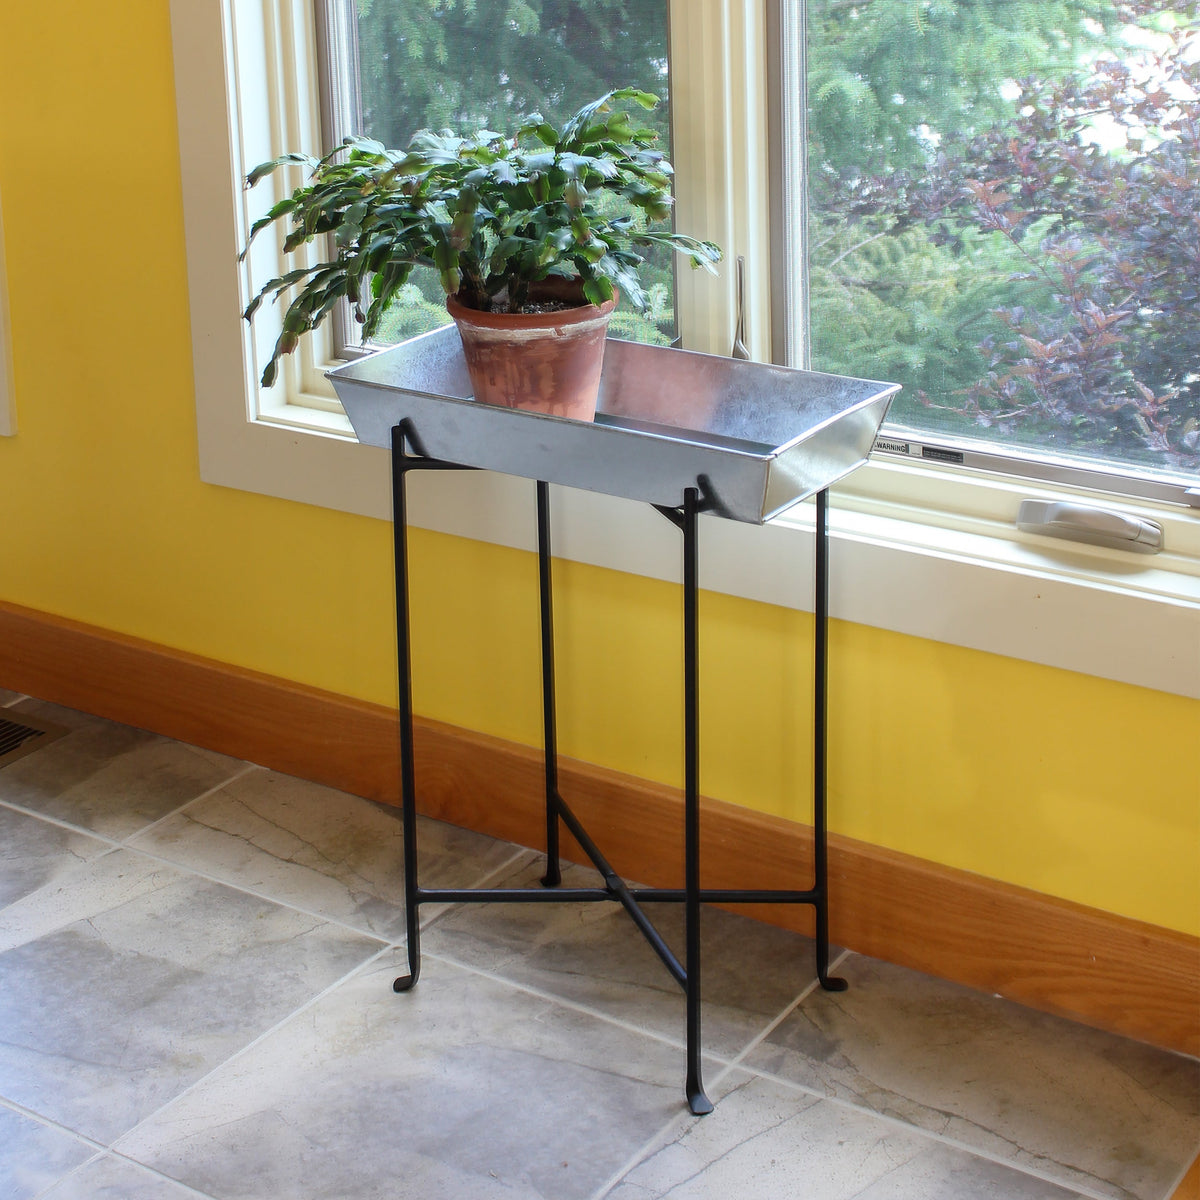 Folding Stand Stands